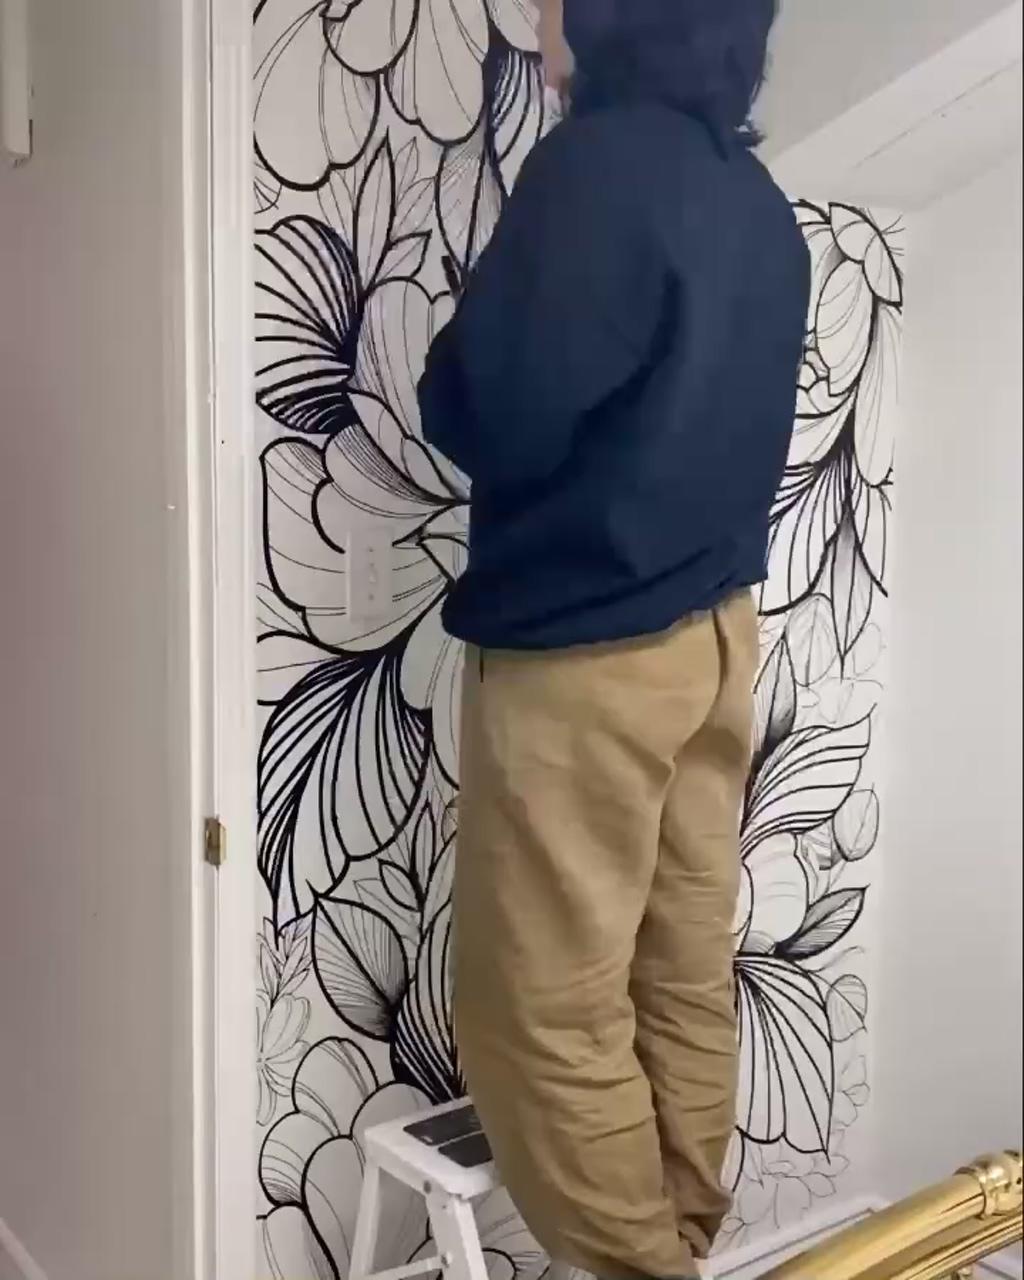 Floral wall mural // process | wall painting decor